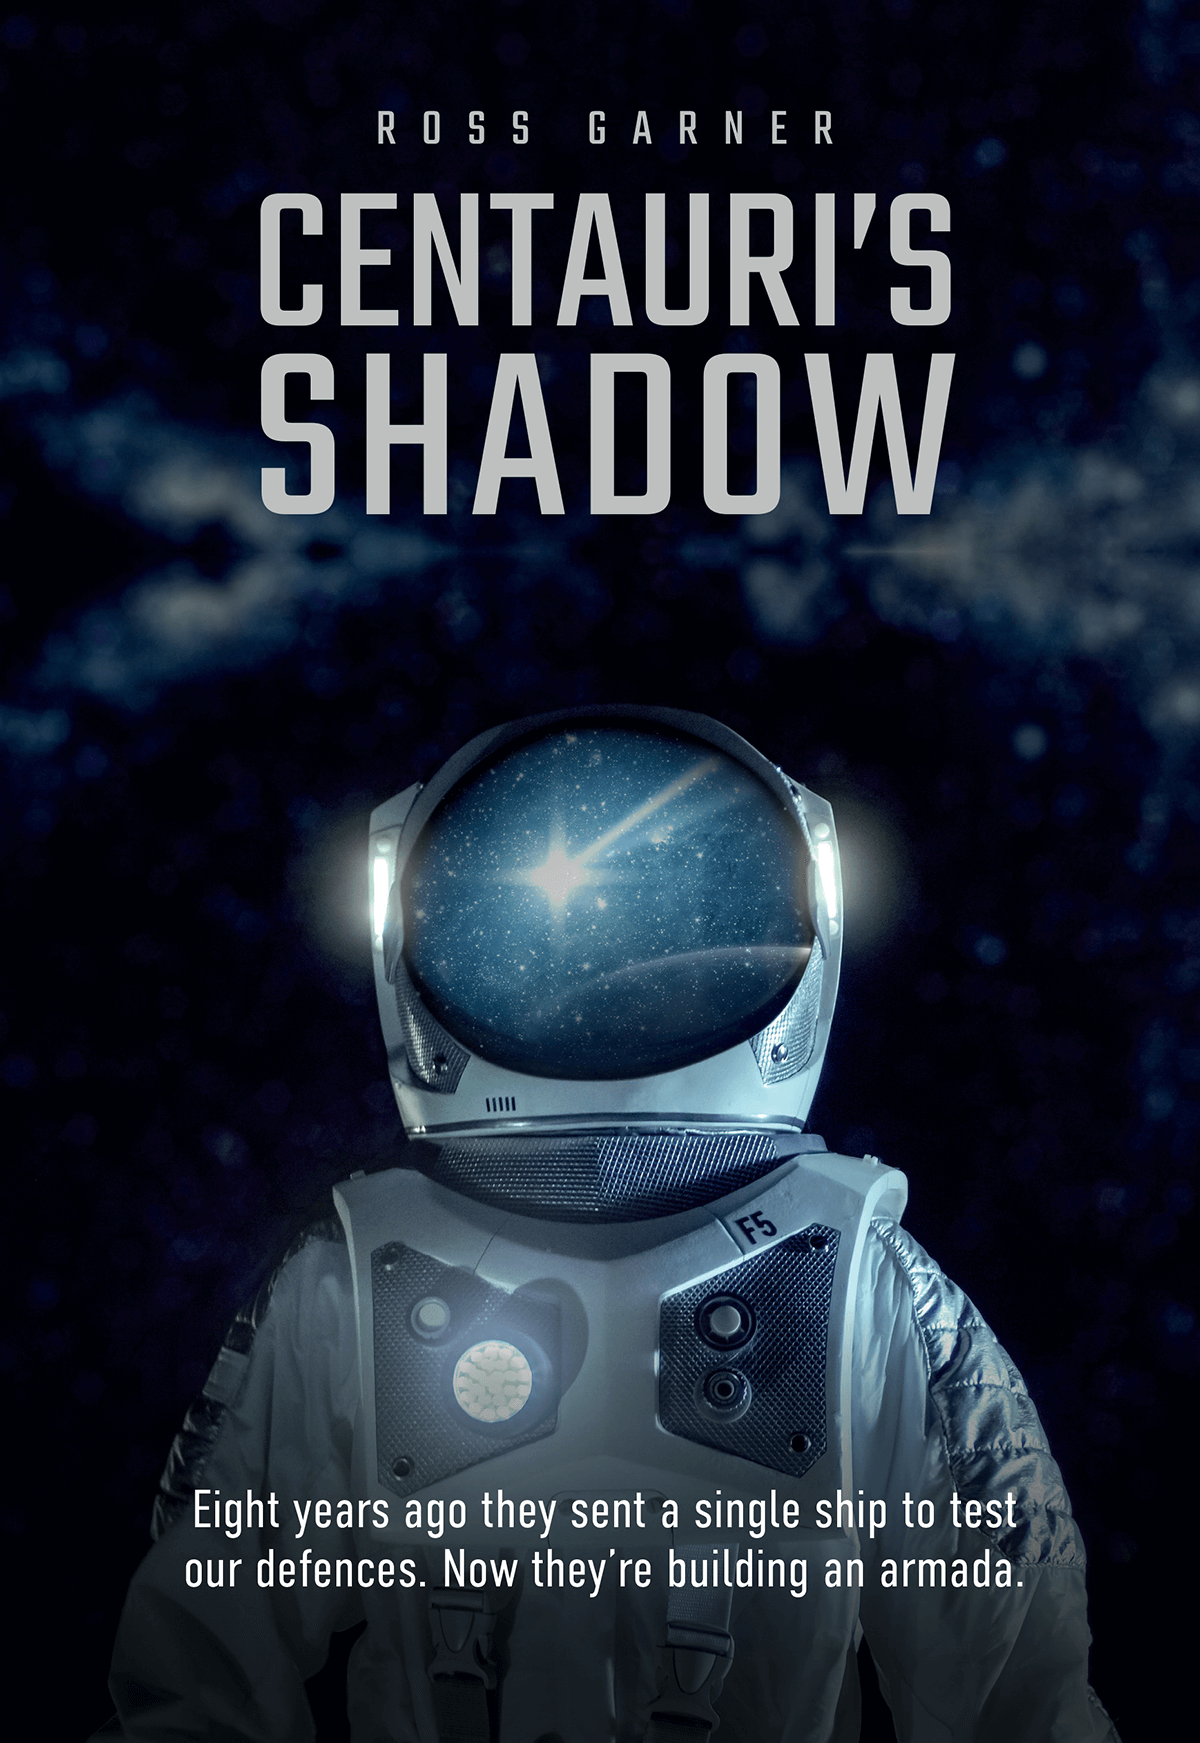 Centauri's Shadow book cover, showing a lone astronaut floating in space.